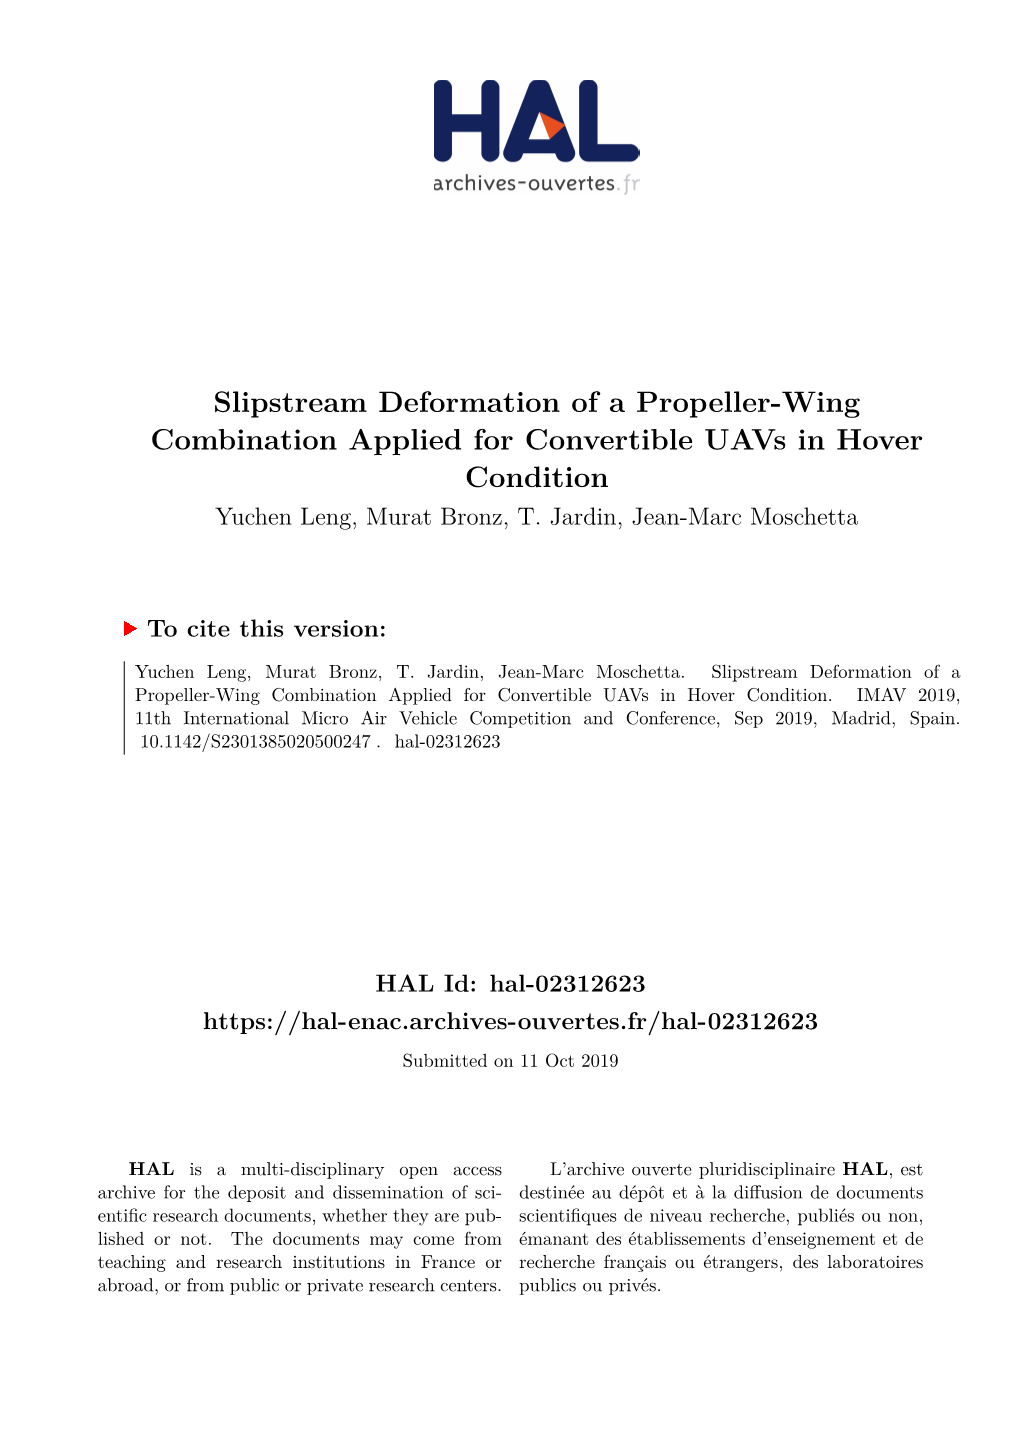 Slipstream Deformation of a Propeller-Wing Combination Applied for Convertible Uavs in Hover Condition Yuchen Leng, Murat Bronz, T